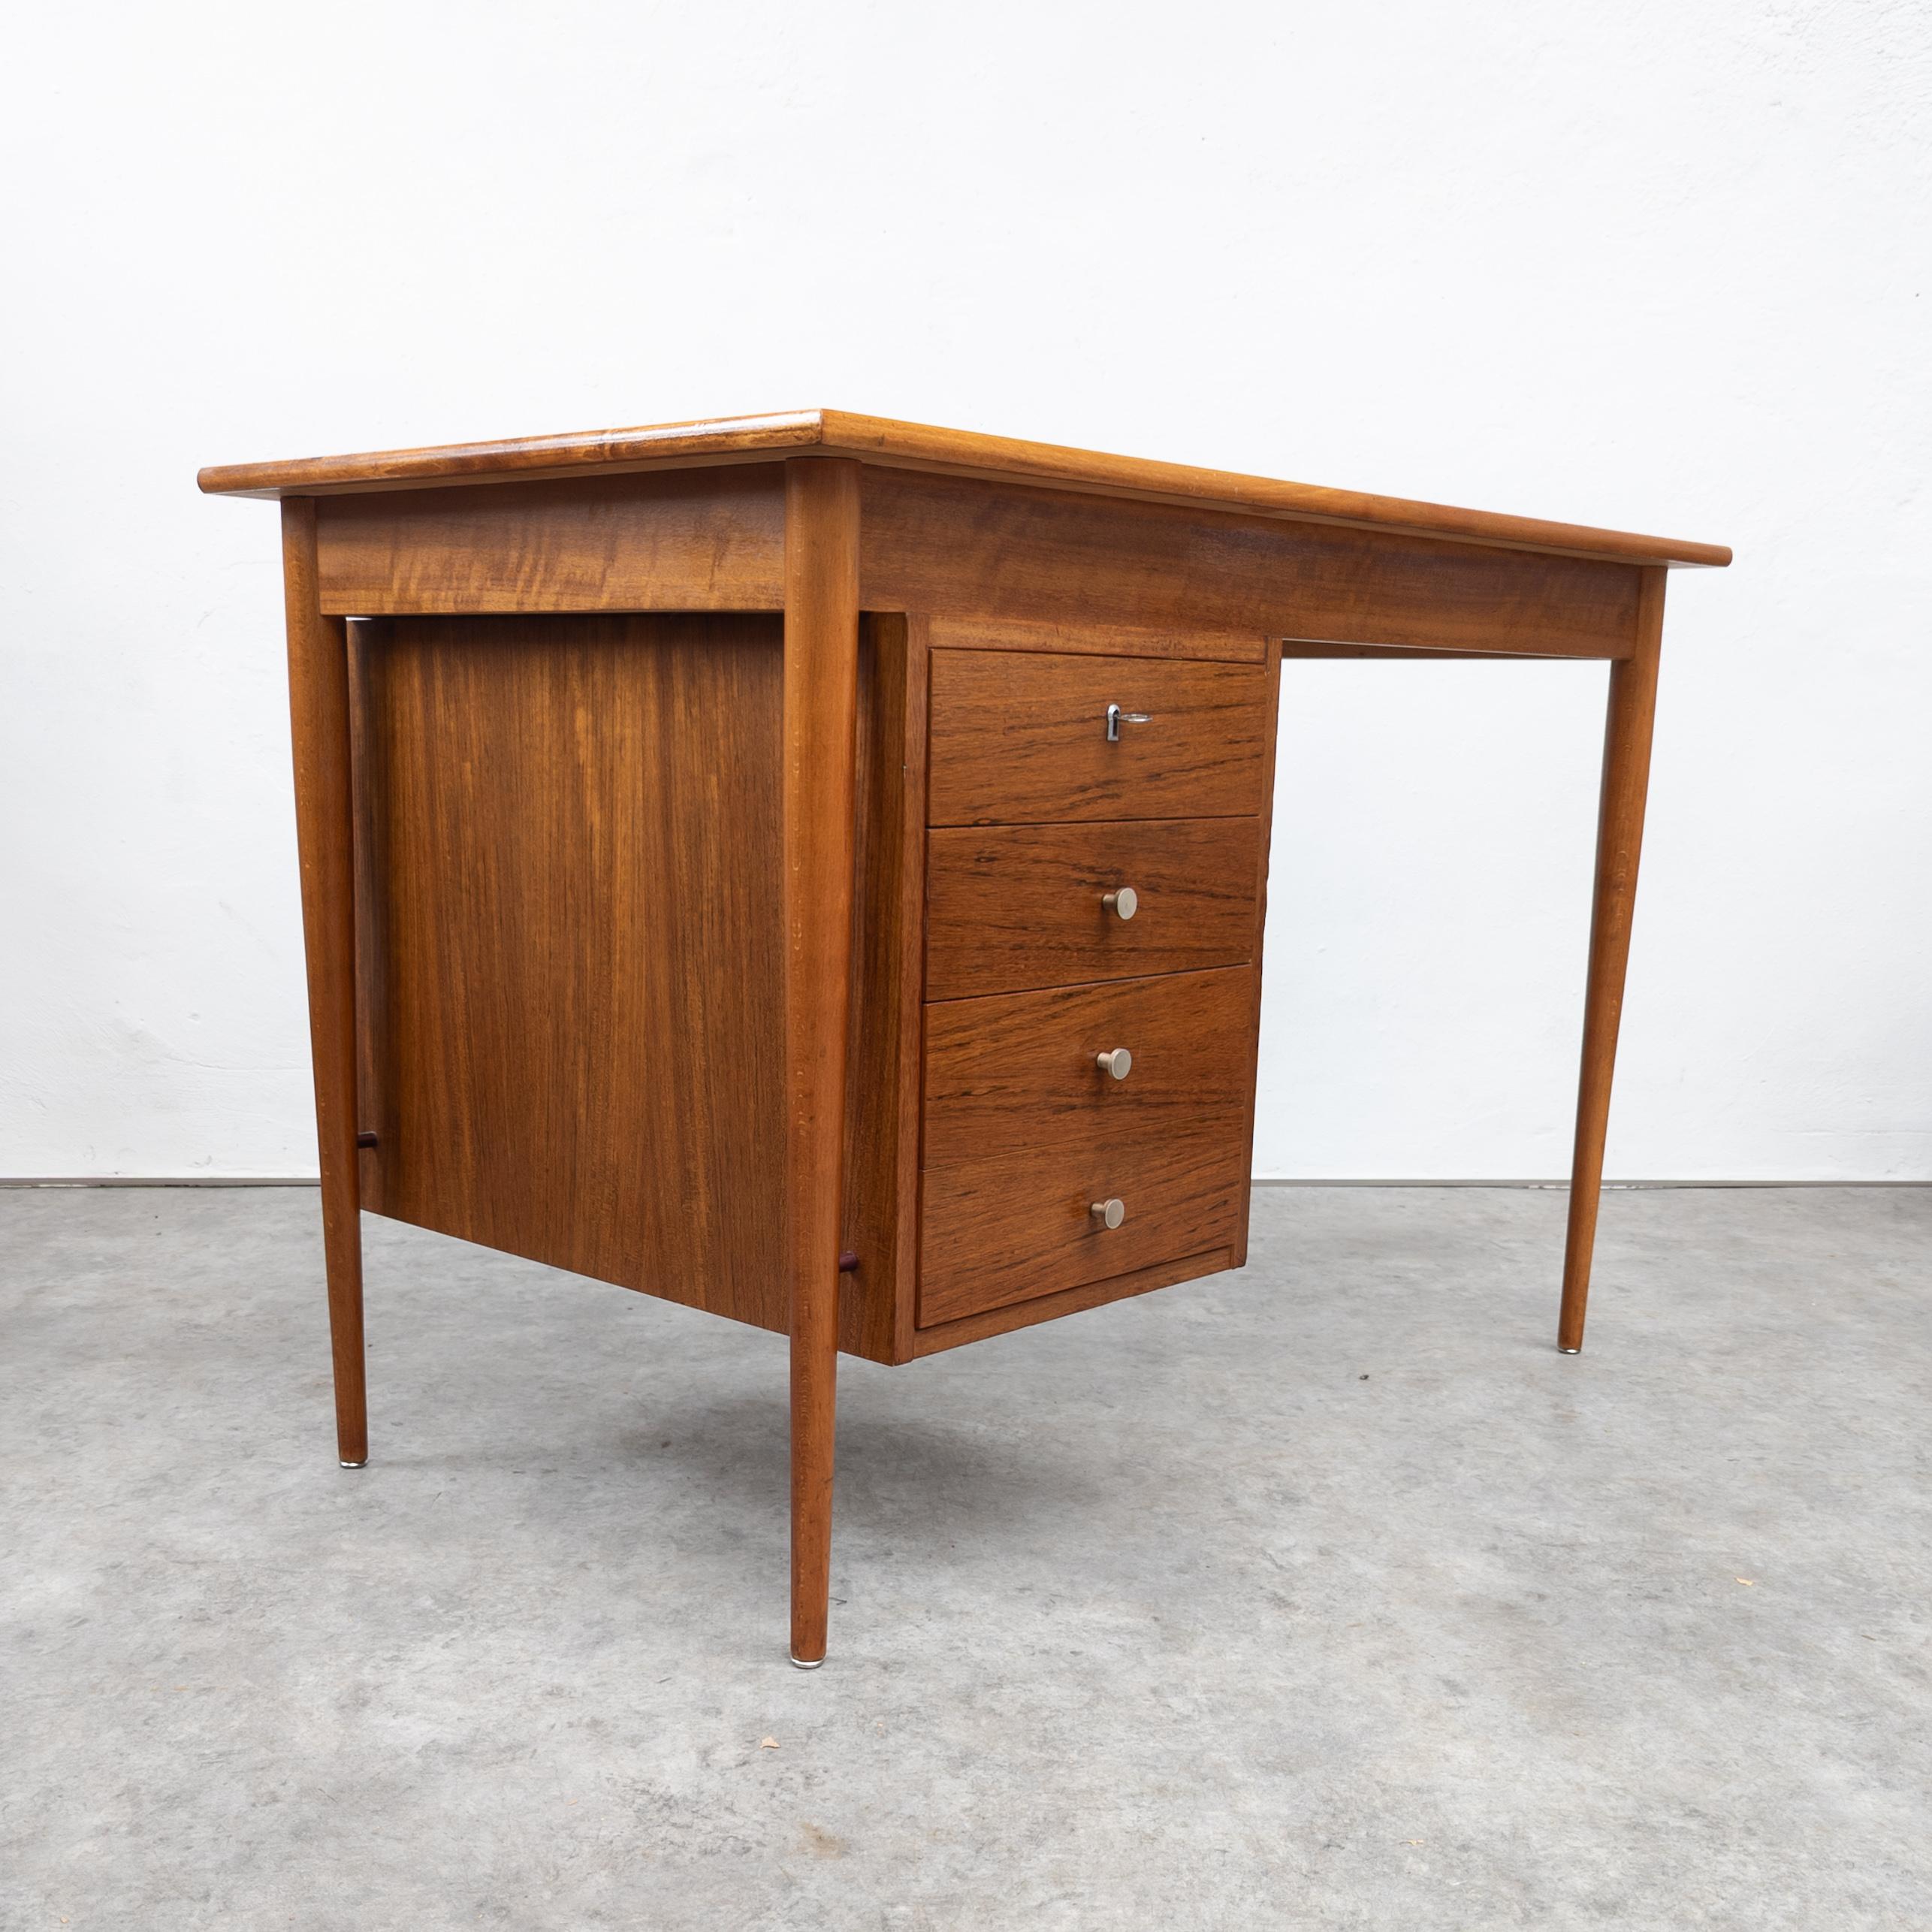 Designed by Czech architect Karel Vyčítal. Manufactured by Dřevotvar Jablonné nad Orlicí, former Czechoslovakia in 1960s. Beautiful desk made of solid oak and veneer. Suitable for any space. In very nice vintage condition with some traces of wear